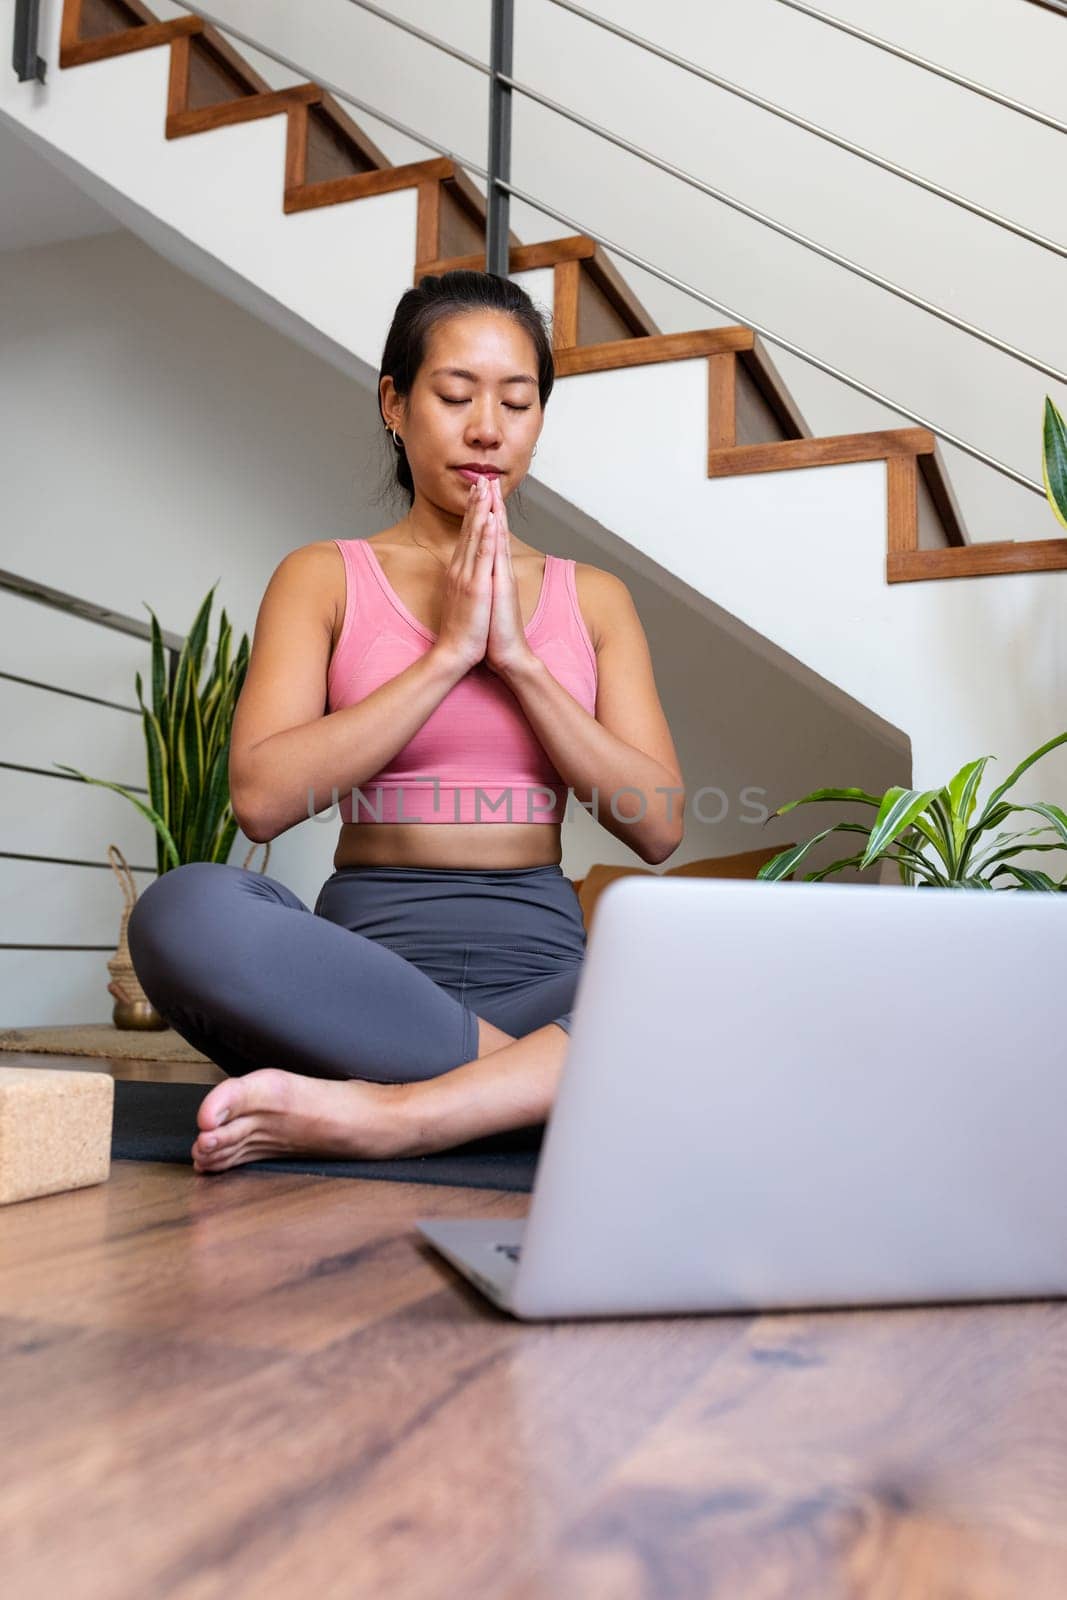 Vertical portrait of young Asian woman doing online meditation with hands in prayer sitting on yoga mat using laptop. by Hoverstock